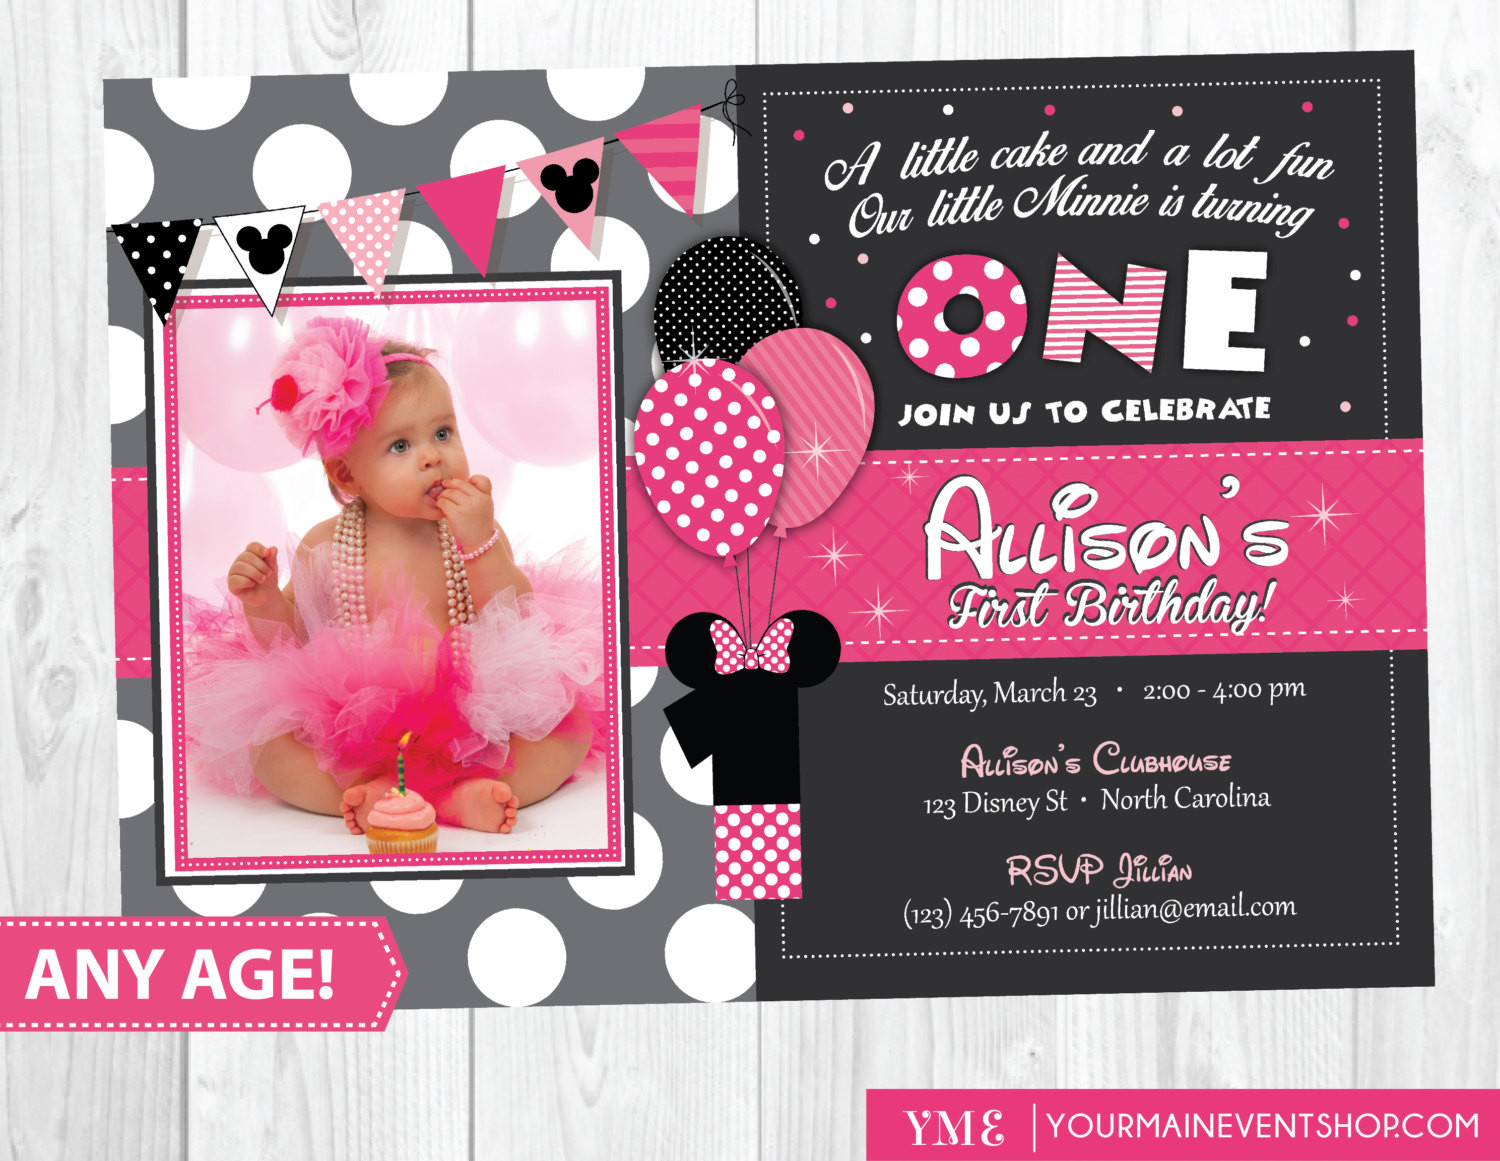 Minnie Mouse Birthday Invitations Personalized
 Minnie Mouse Birthday Invitation Minnie Mouse Inspired